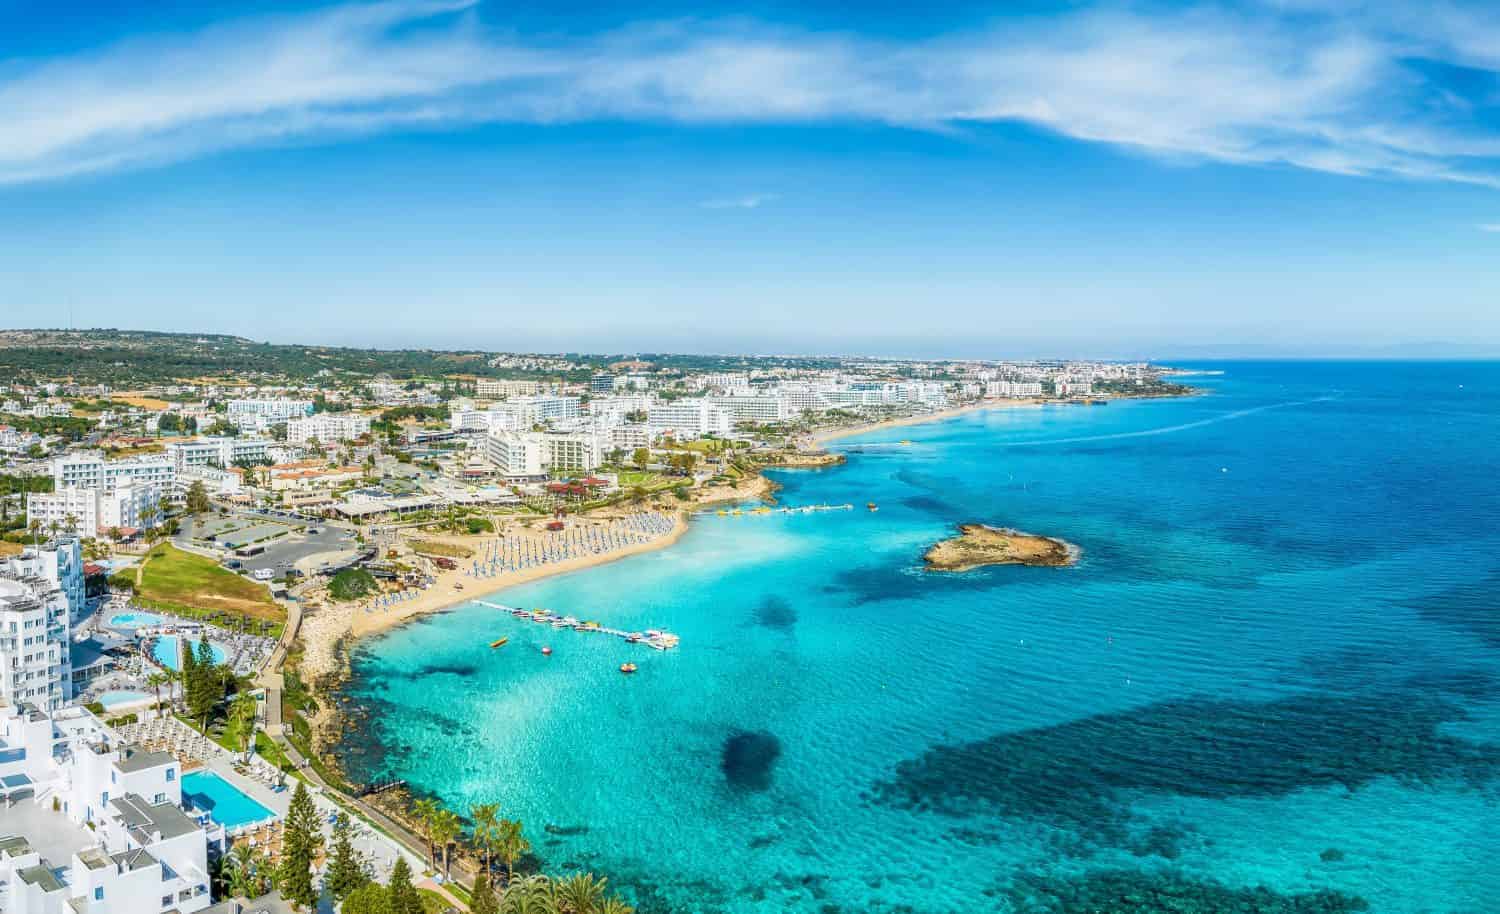 <p>As one of Europe’s hottest countries, Cyprus offers lengthy summers and short, mild winters. The island enjoys around 320 sunny days each year, with coastal summer temperatures regularly exceeding 86°F (30°C). </p><p>Remember to scroll up and hit the ‘Follow’ button to keep up with the newest stories from Seattle Travel on your Microsoft Start feed or MSN homepage!</p>